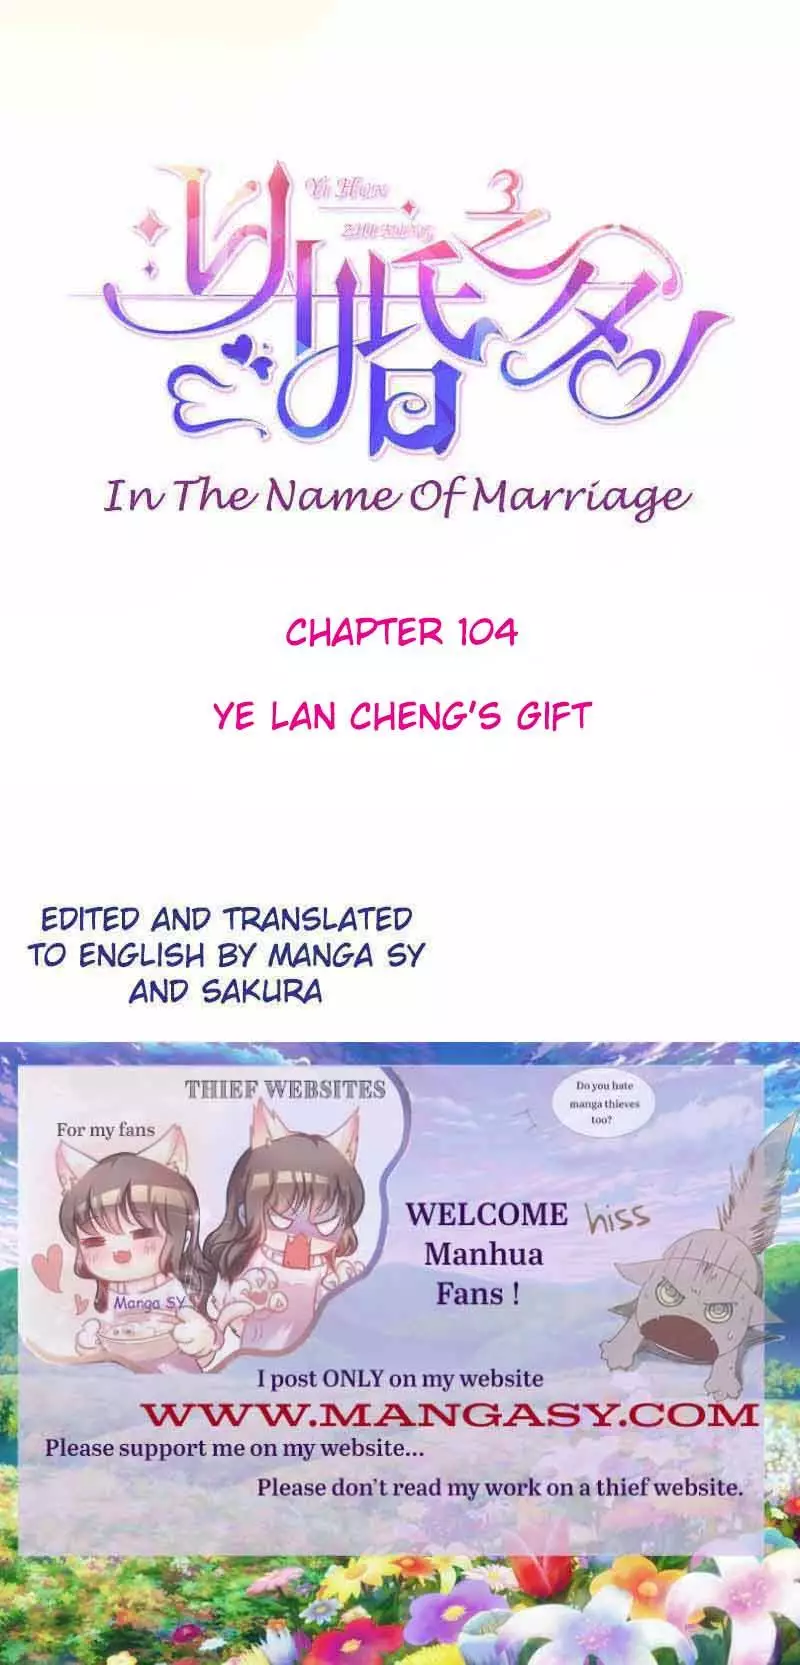 In The Name Of Marriage - 104 page 1-f3a0ce69